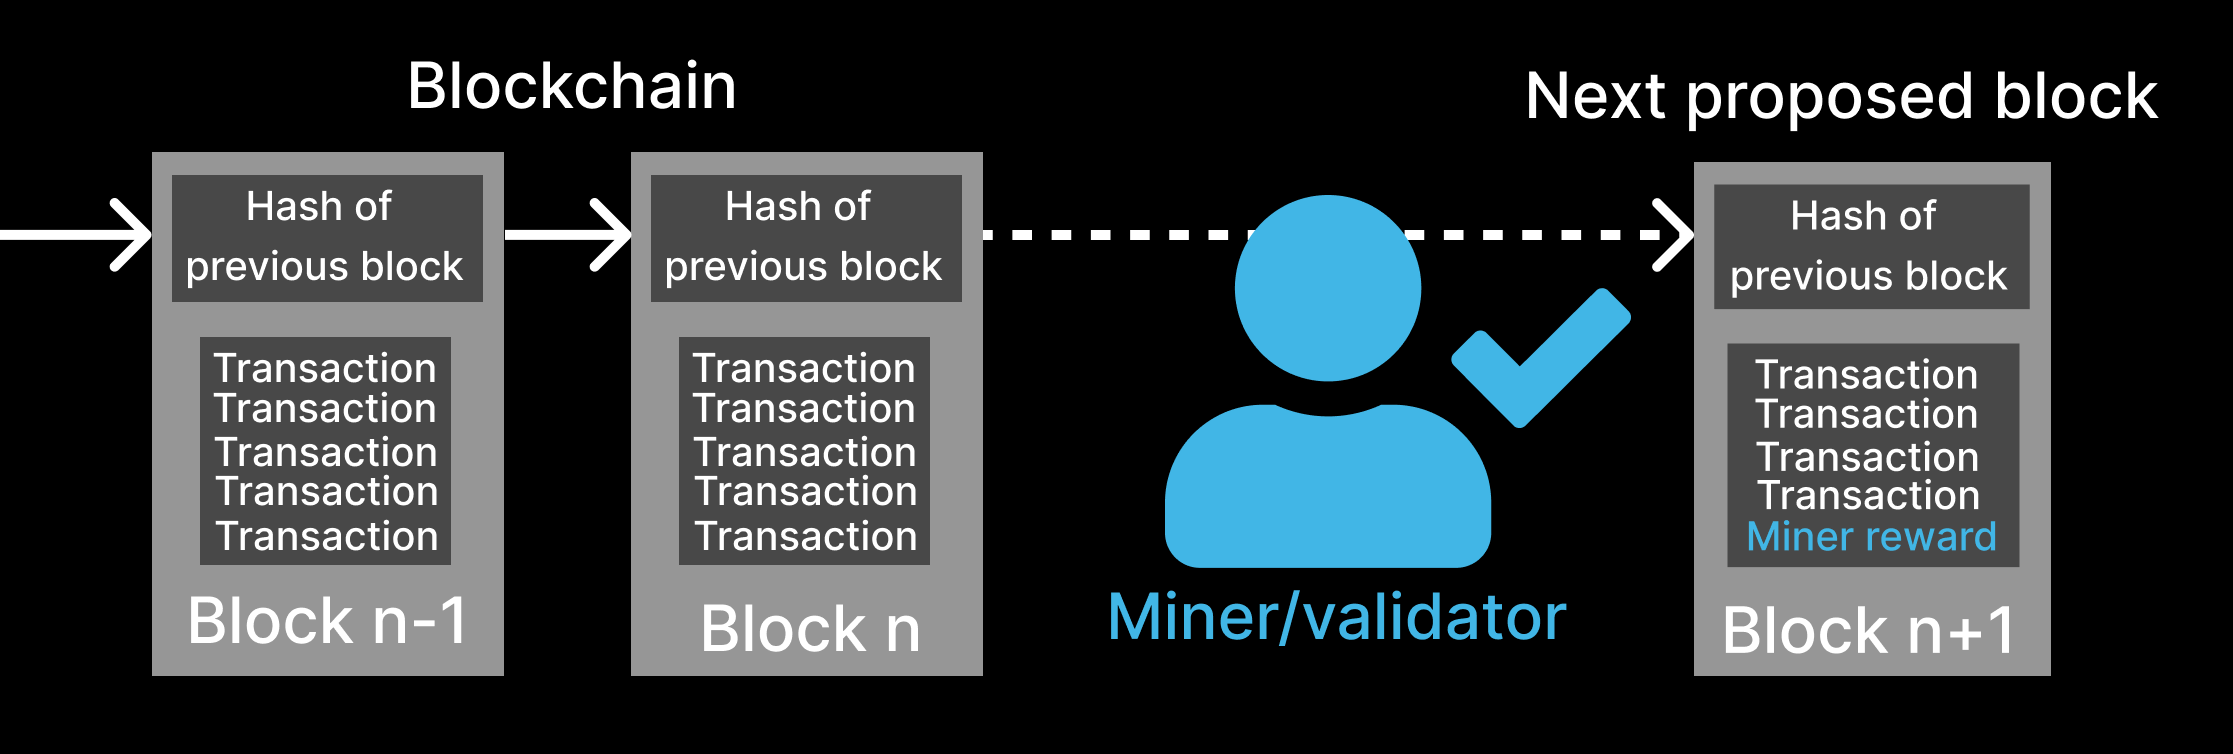 Miners/validators compile all pending transactions, validate them and add them to the blockchain. They get to add a special transaction to the end of each block that creates a rewards for their work.